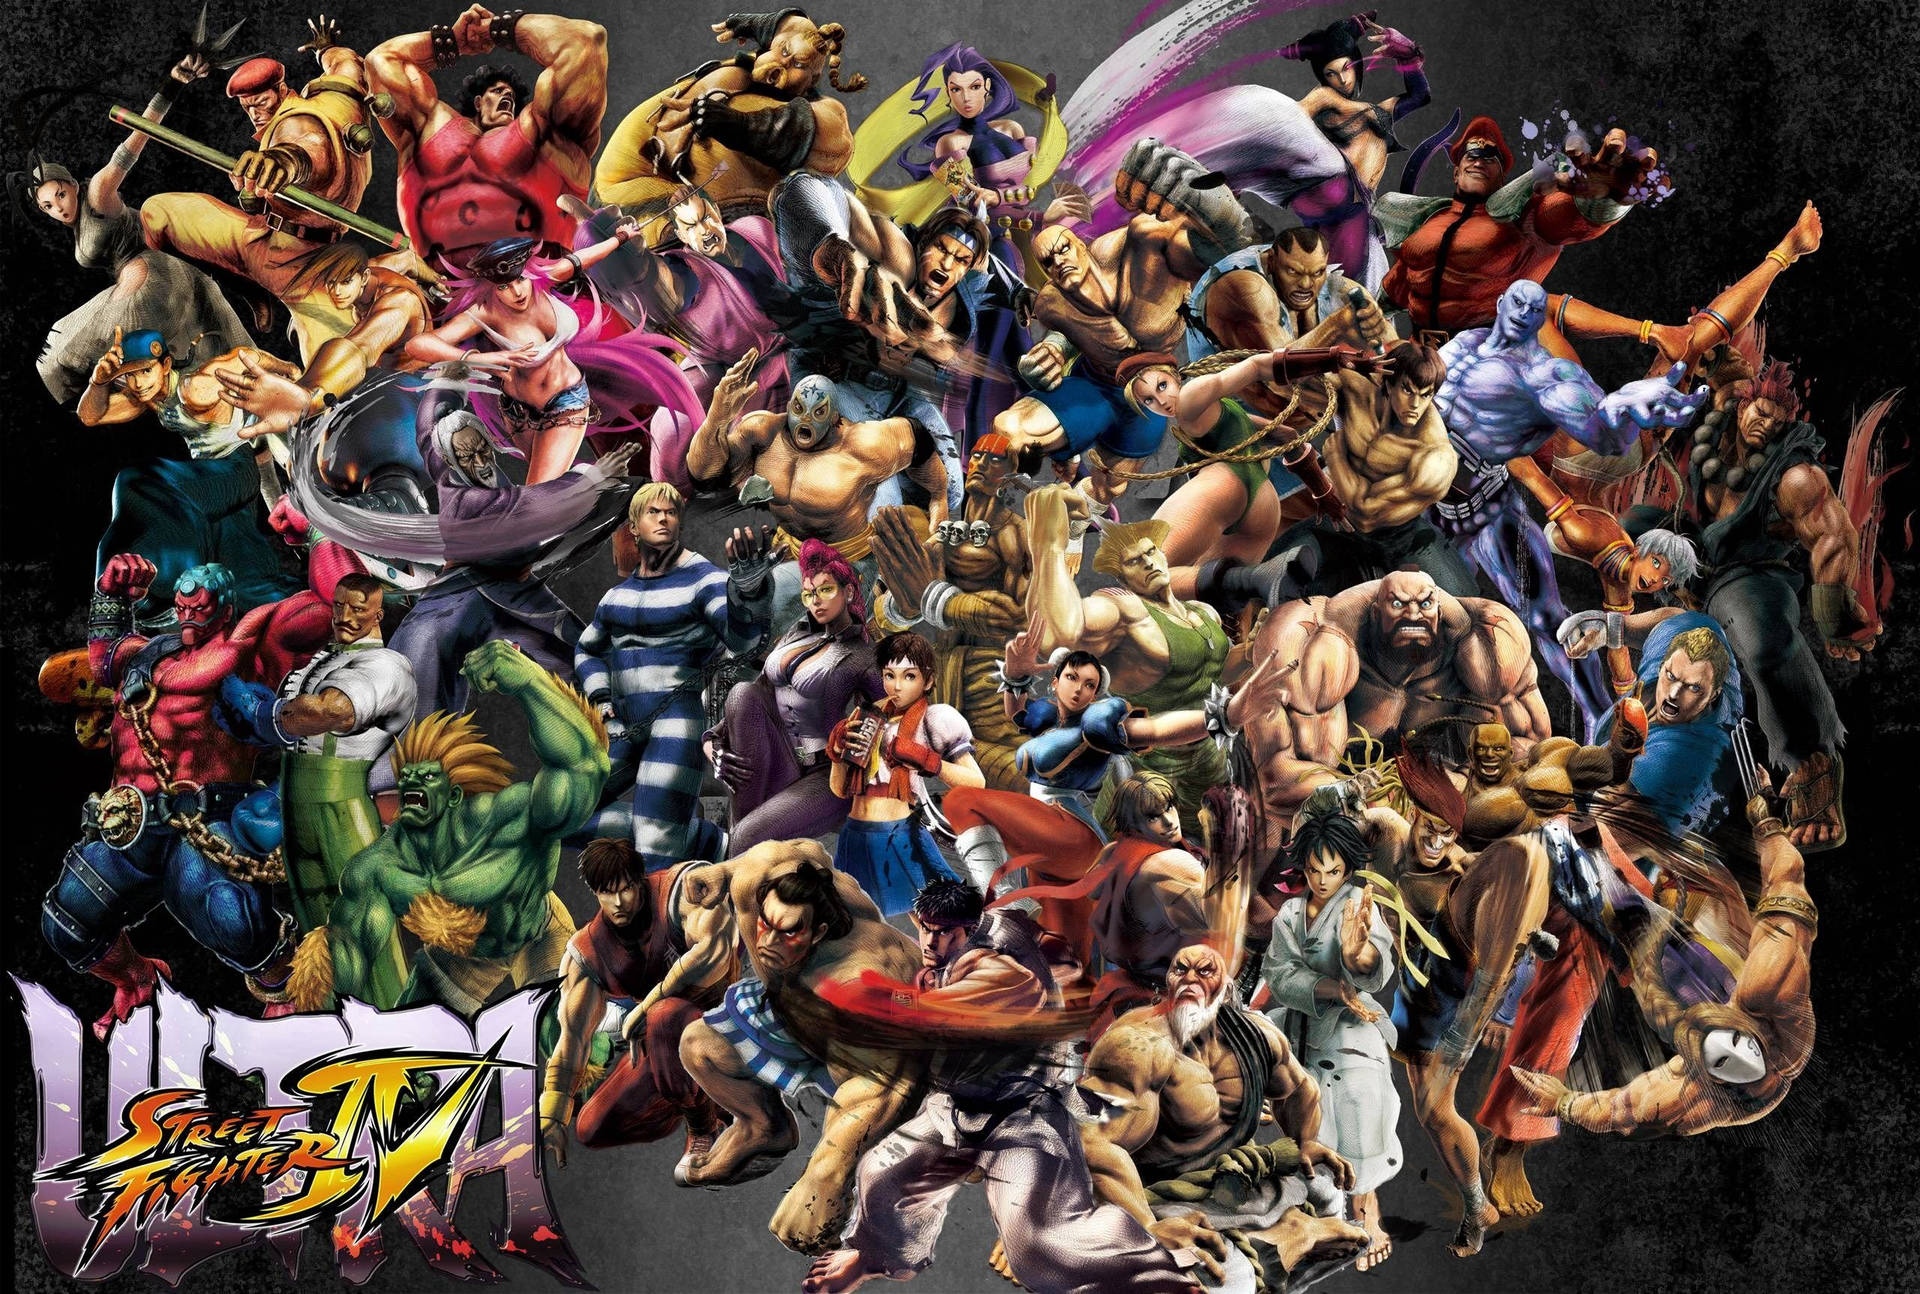 Complete Ultra Street Fighter 4